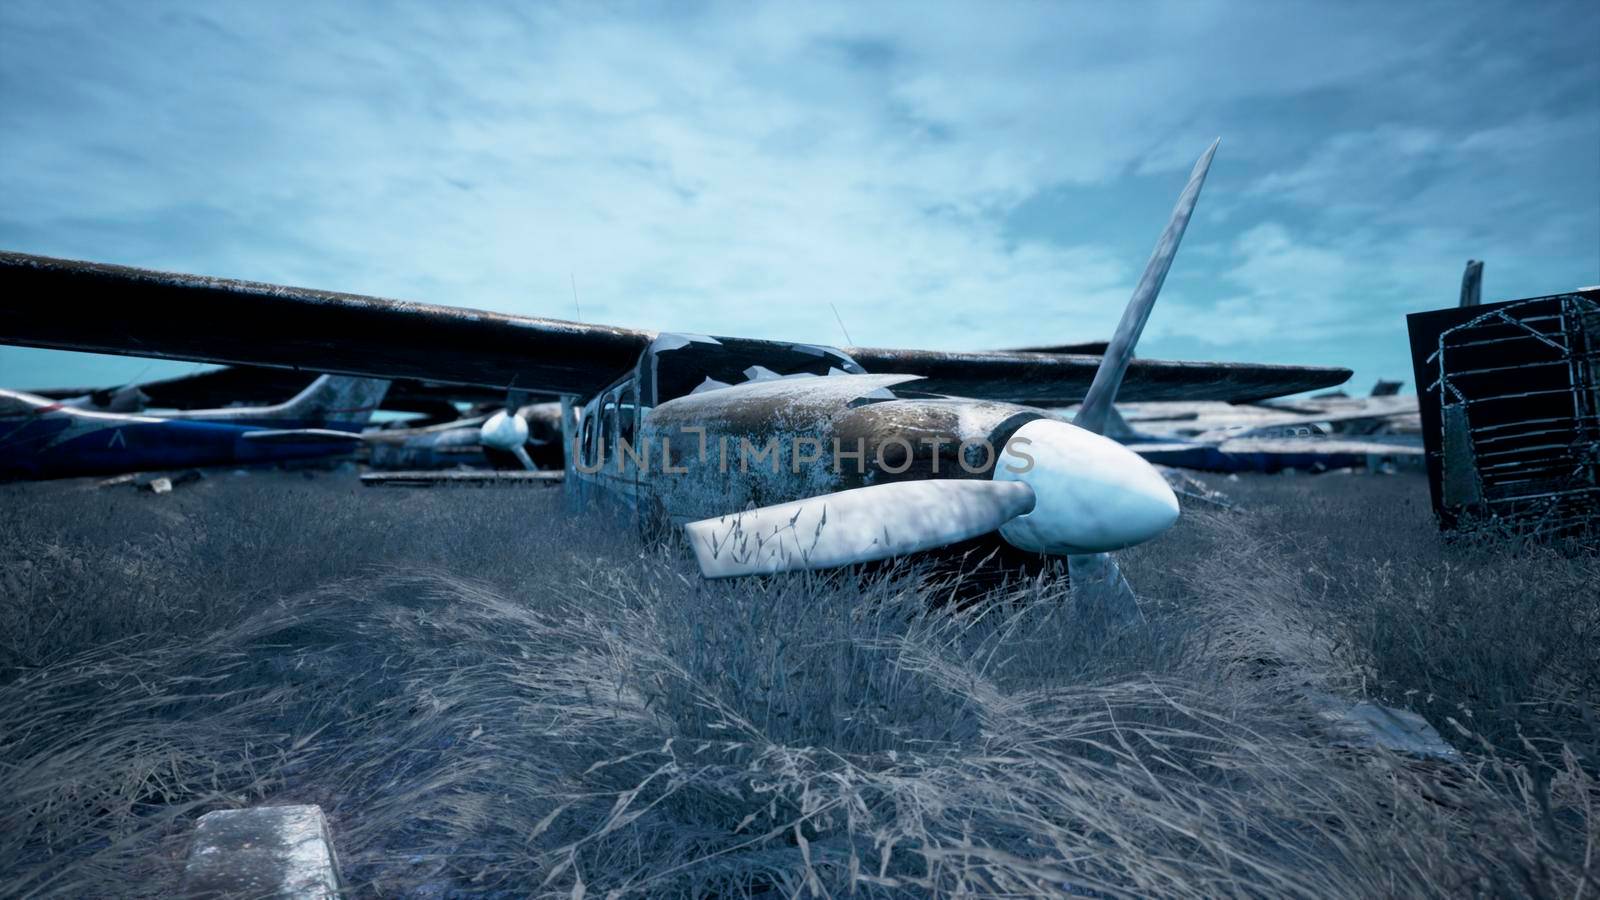 Abandoned and destroyed planes are in the field. A lot of rusty, forgotten and broken planes.